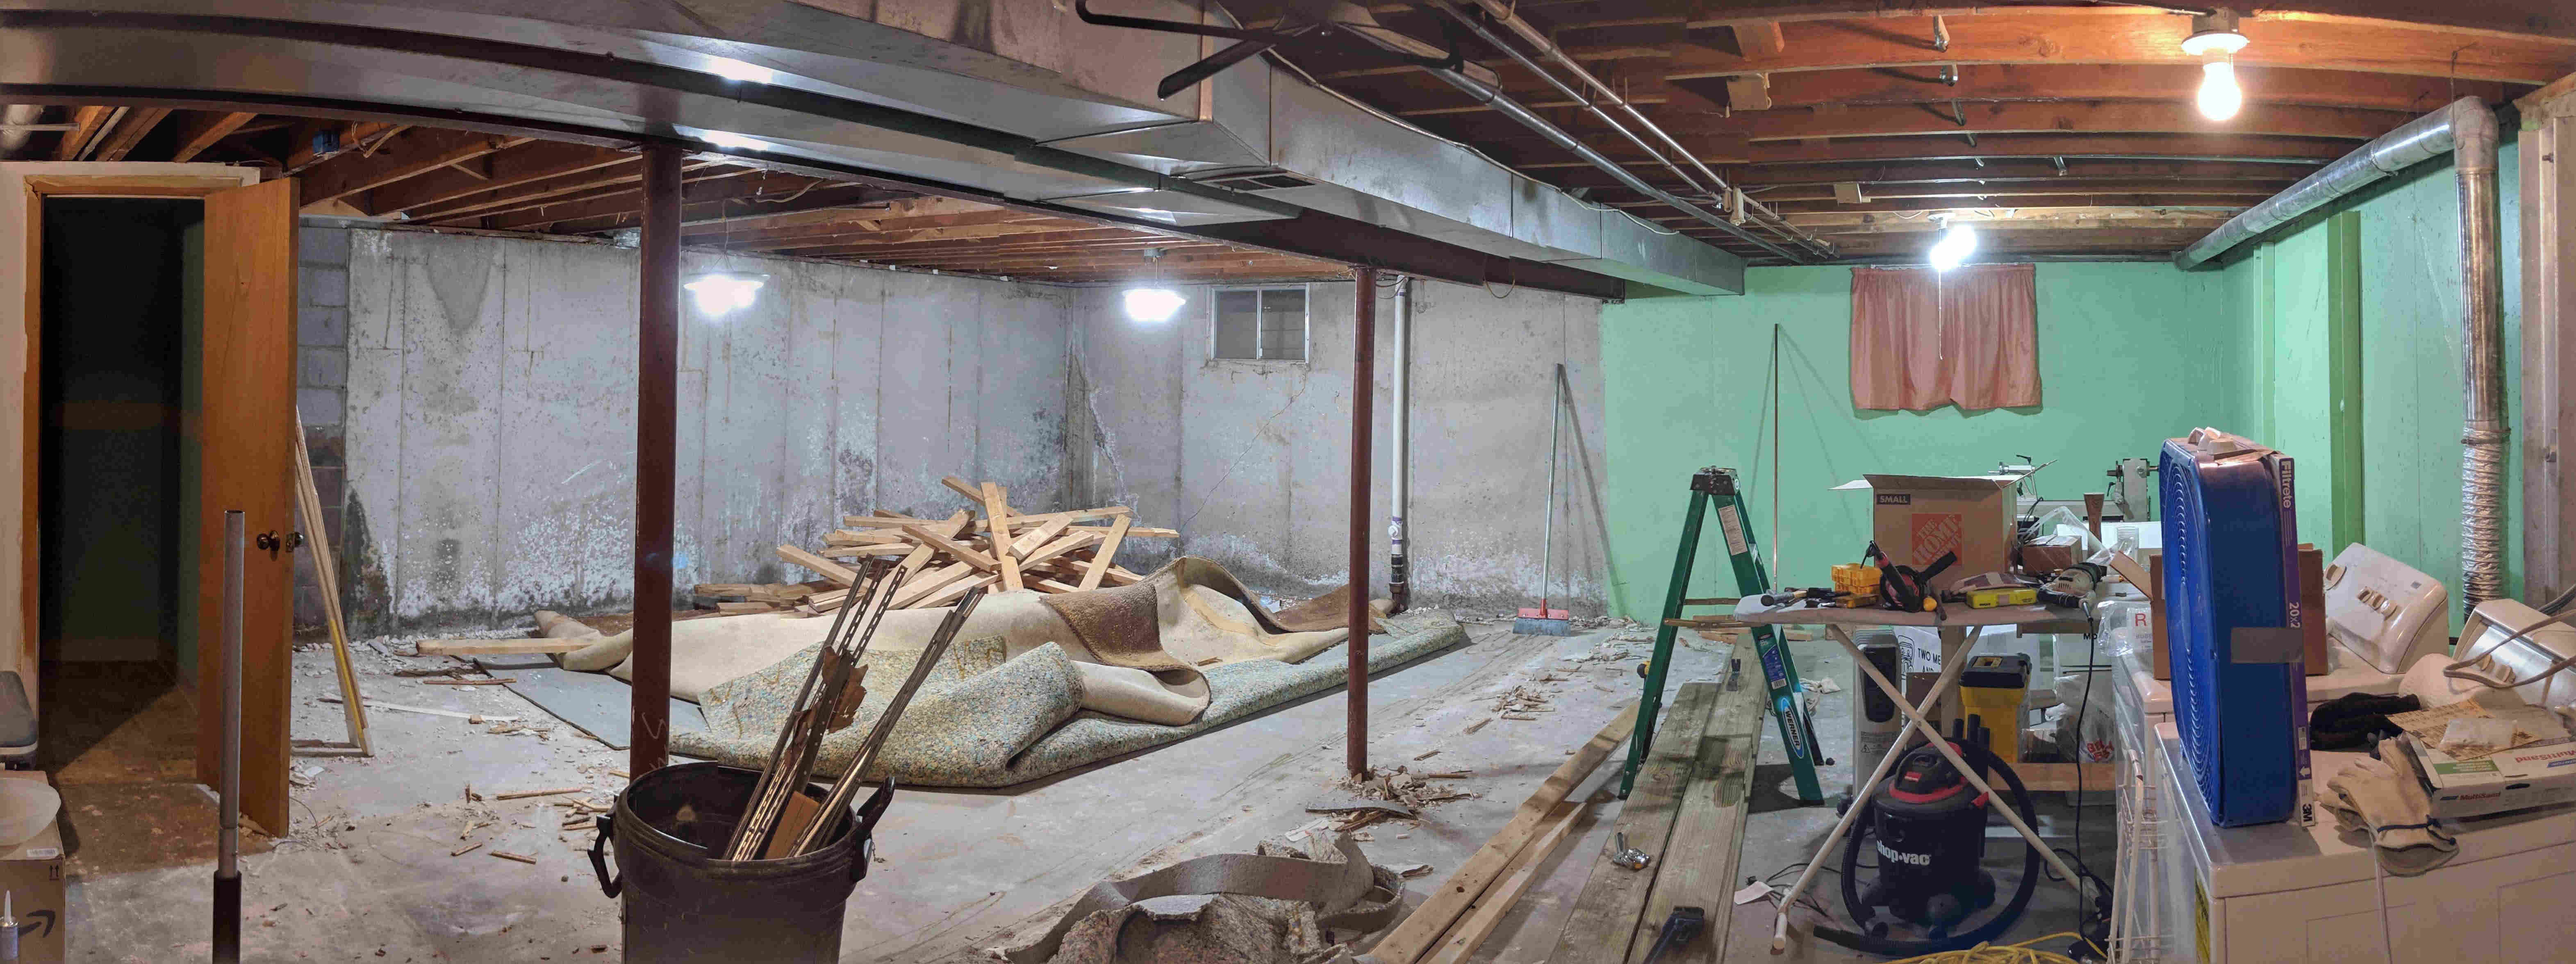 Shop under construction - panoramic